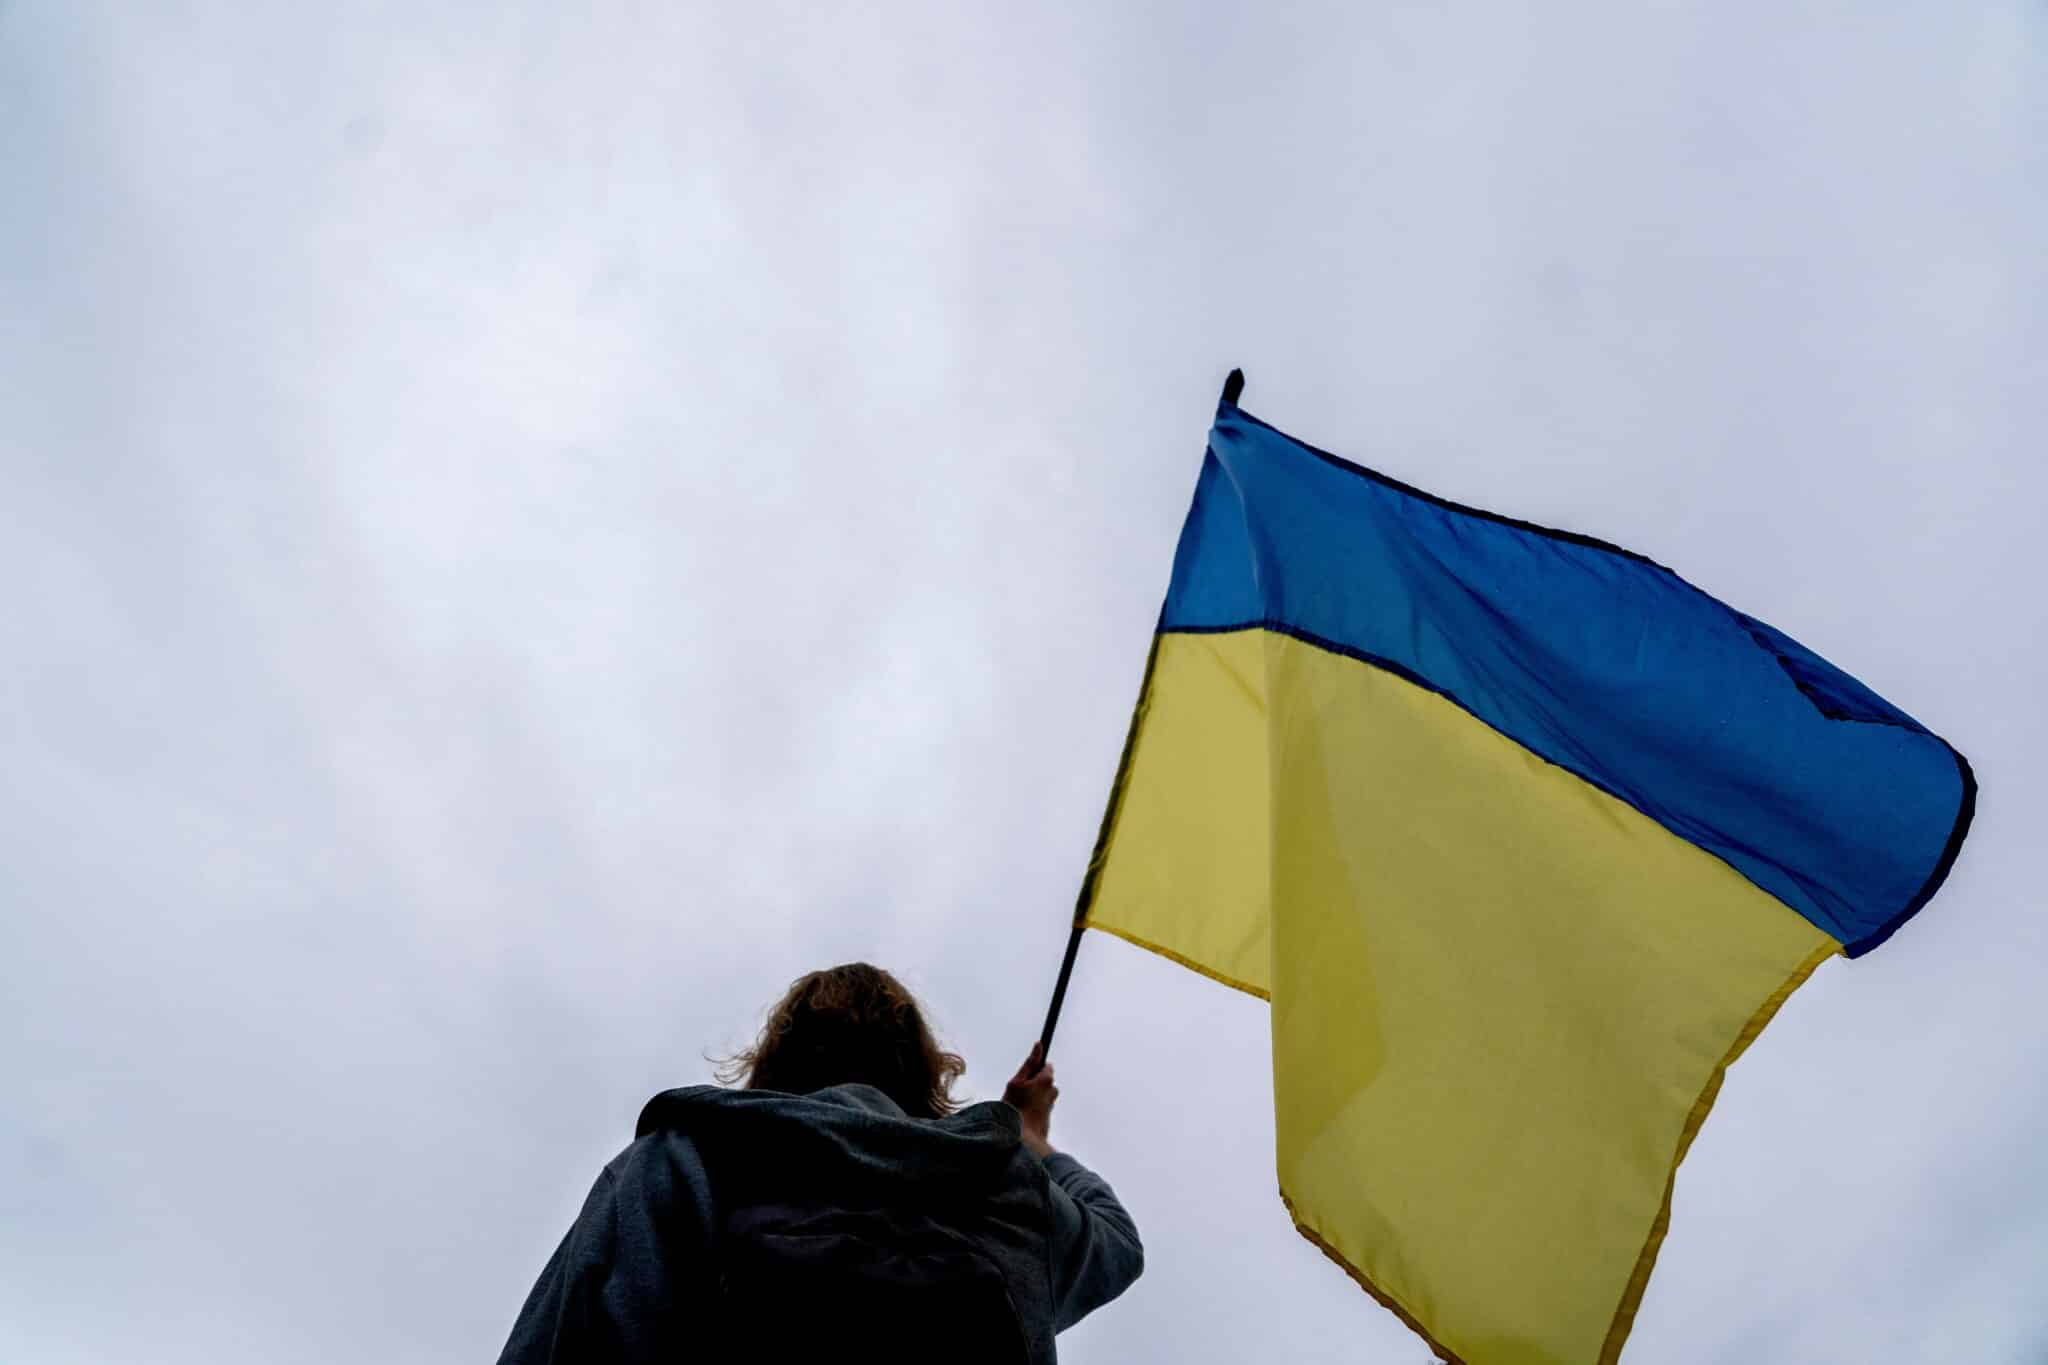 TOPSHOT - A demonstrator carries the flag of Ukraine during a rally at the World War II memorial in Washington, DC, on May 1, 2022. (Photo by Stefani Reynolds / AFP) (Photo by STEFANI REYNOLDS/AFP via Getty Images)